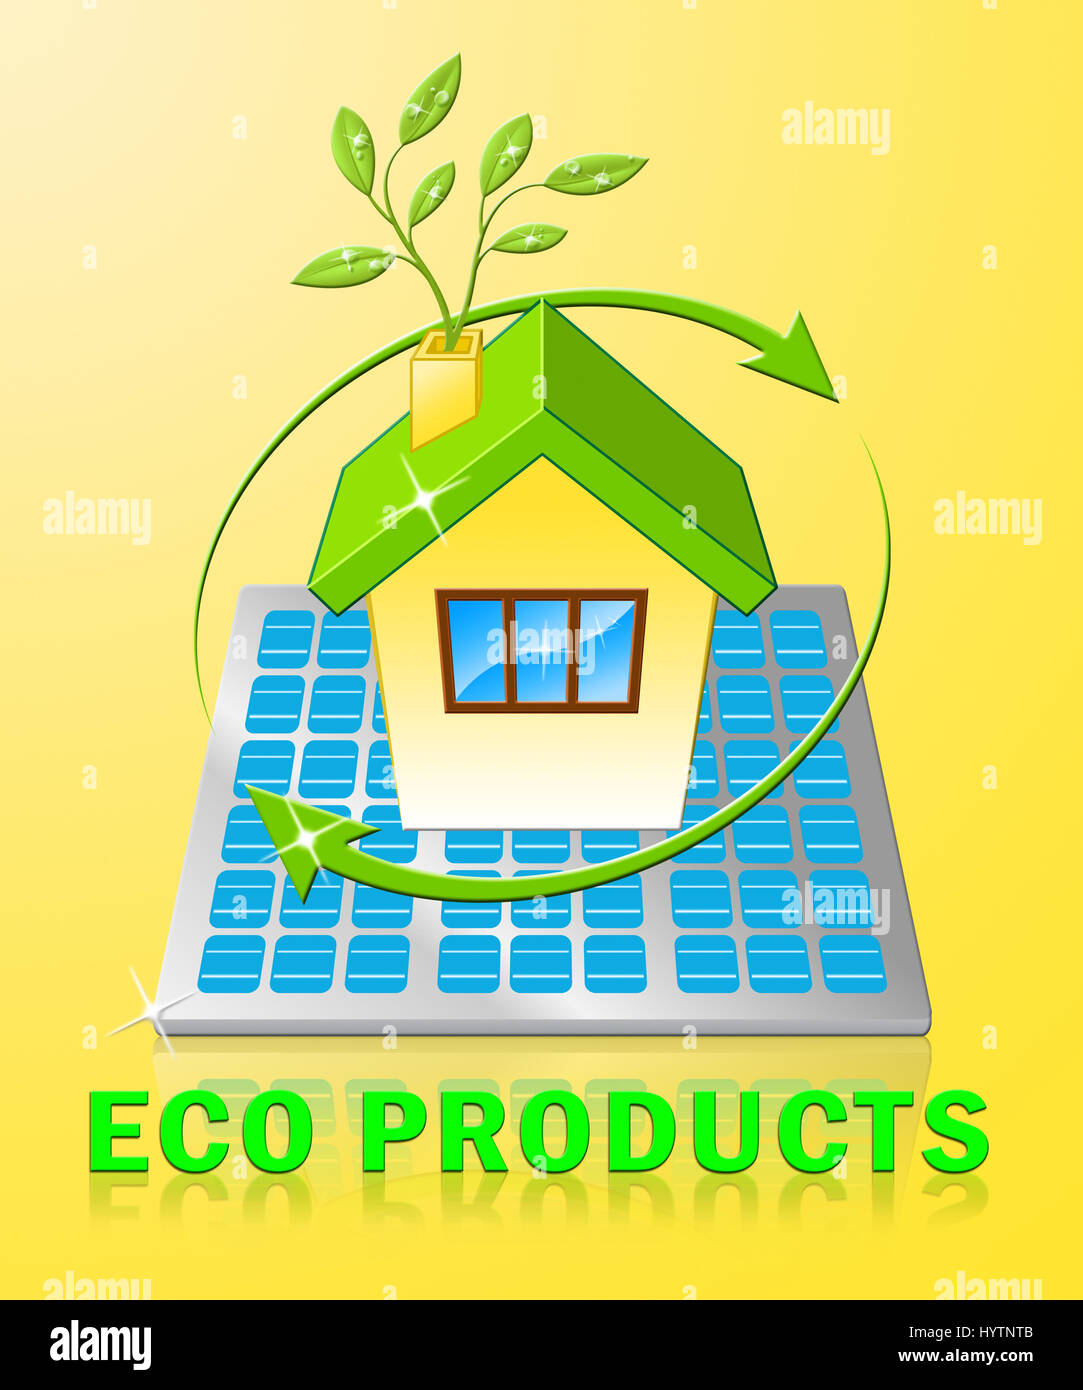 Eco Products House Displays Green Goods 3d Illustration Stock Photo